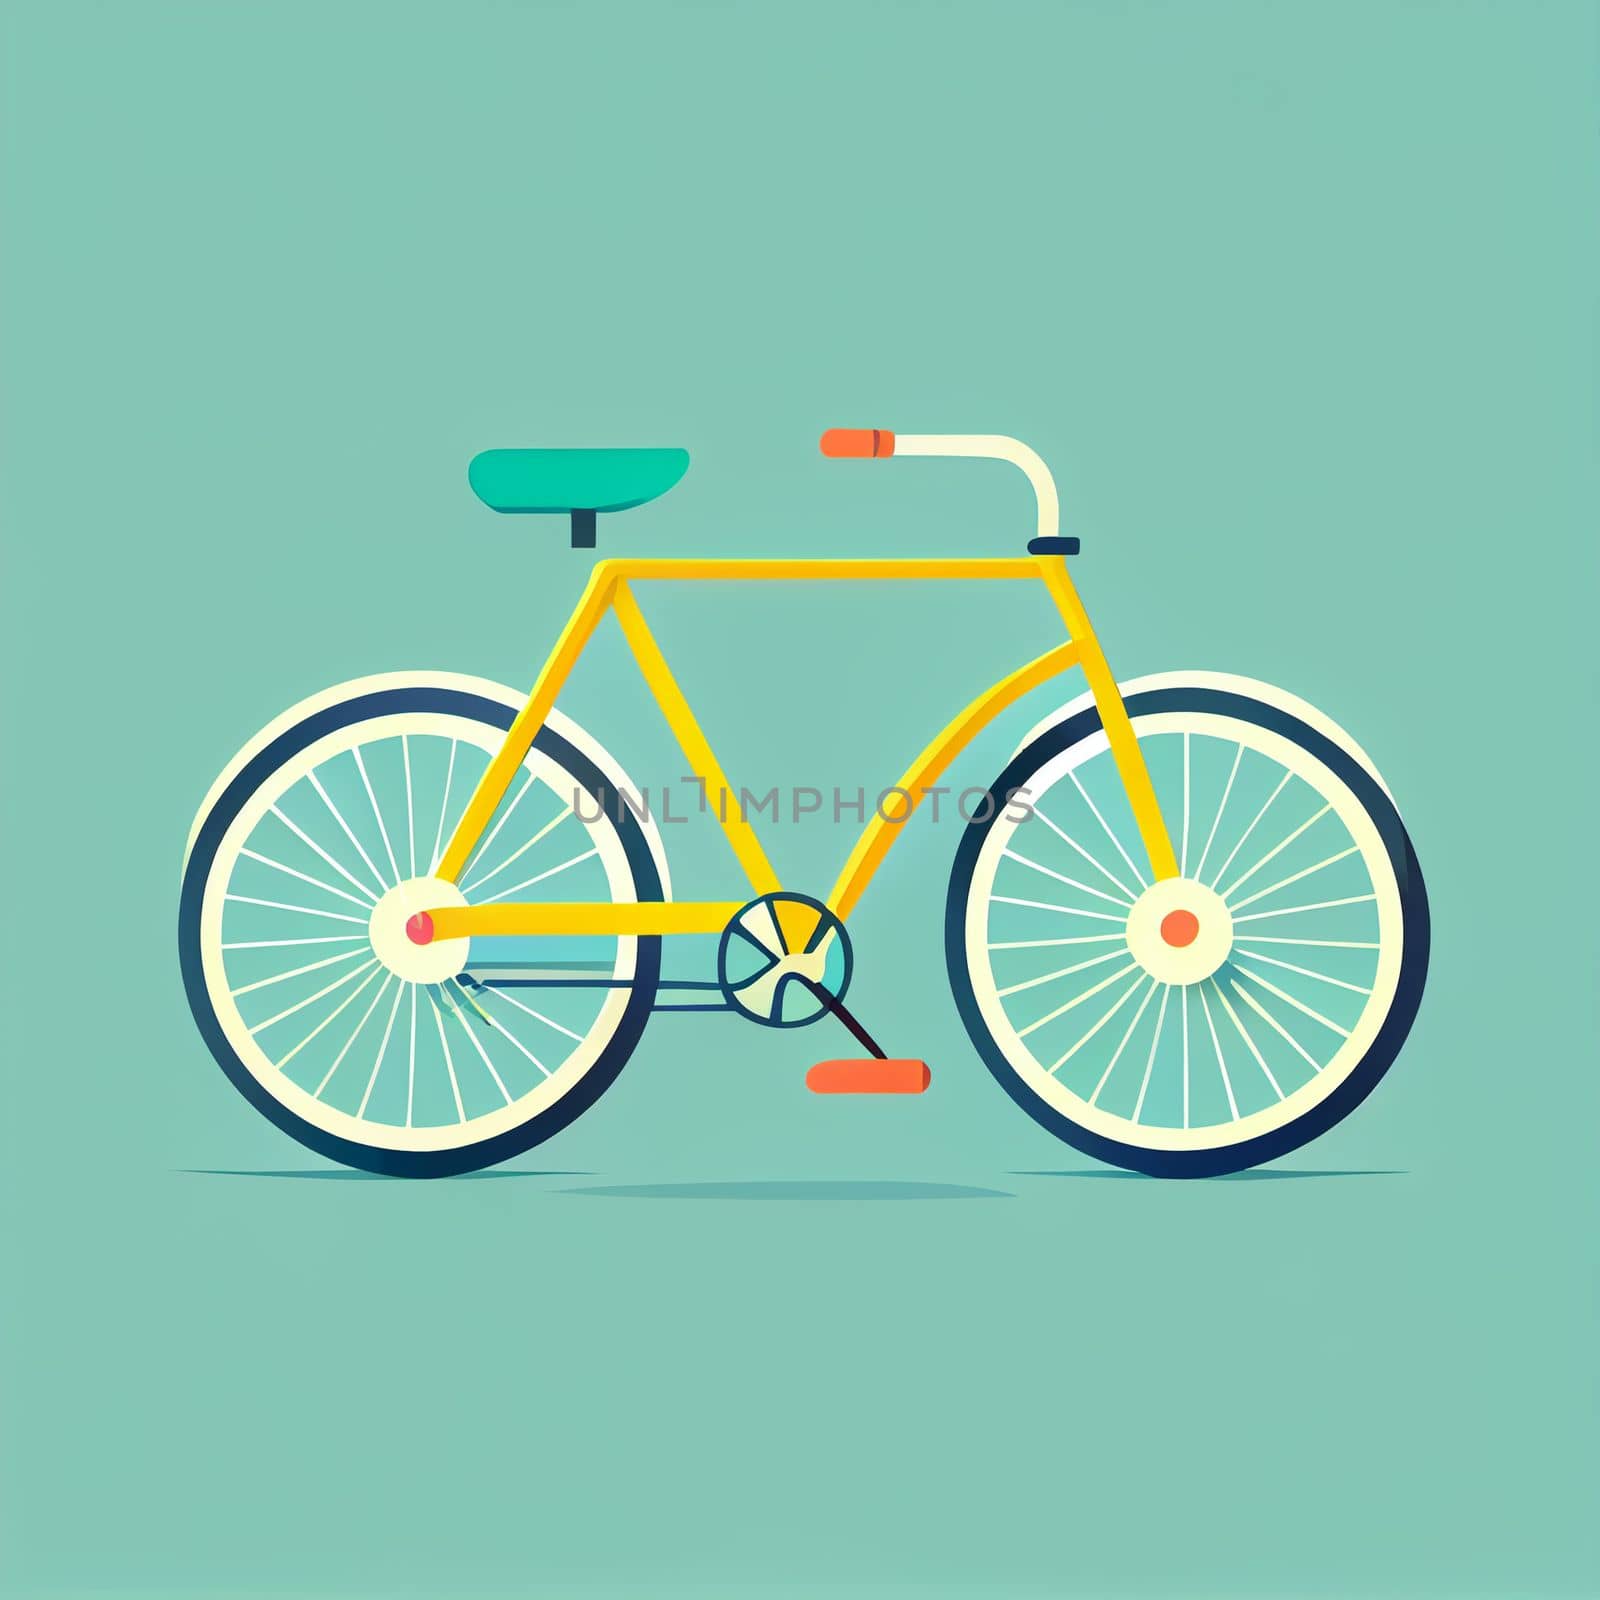 Modern flat design of Transport public transportable bicycle for transportation in city. illustration flat style.